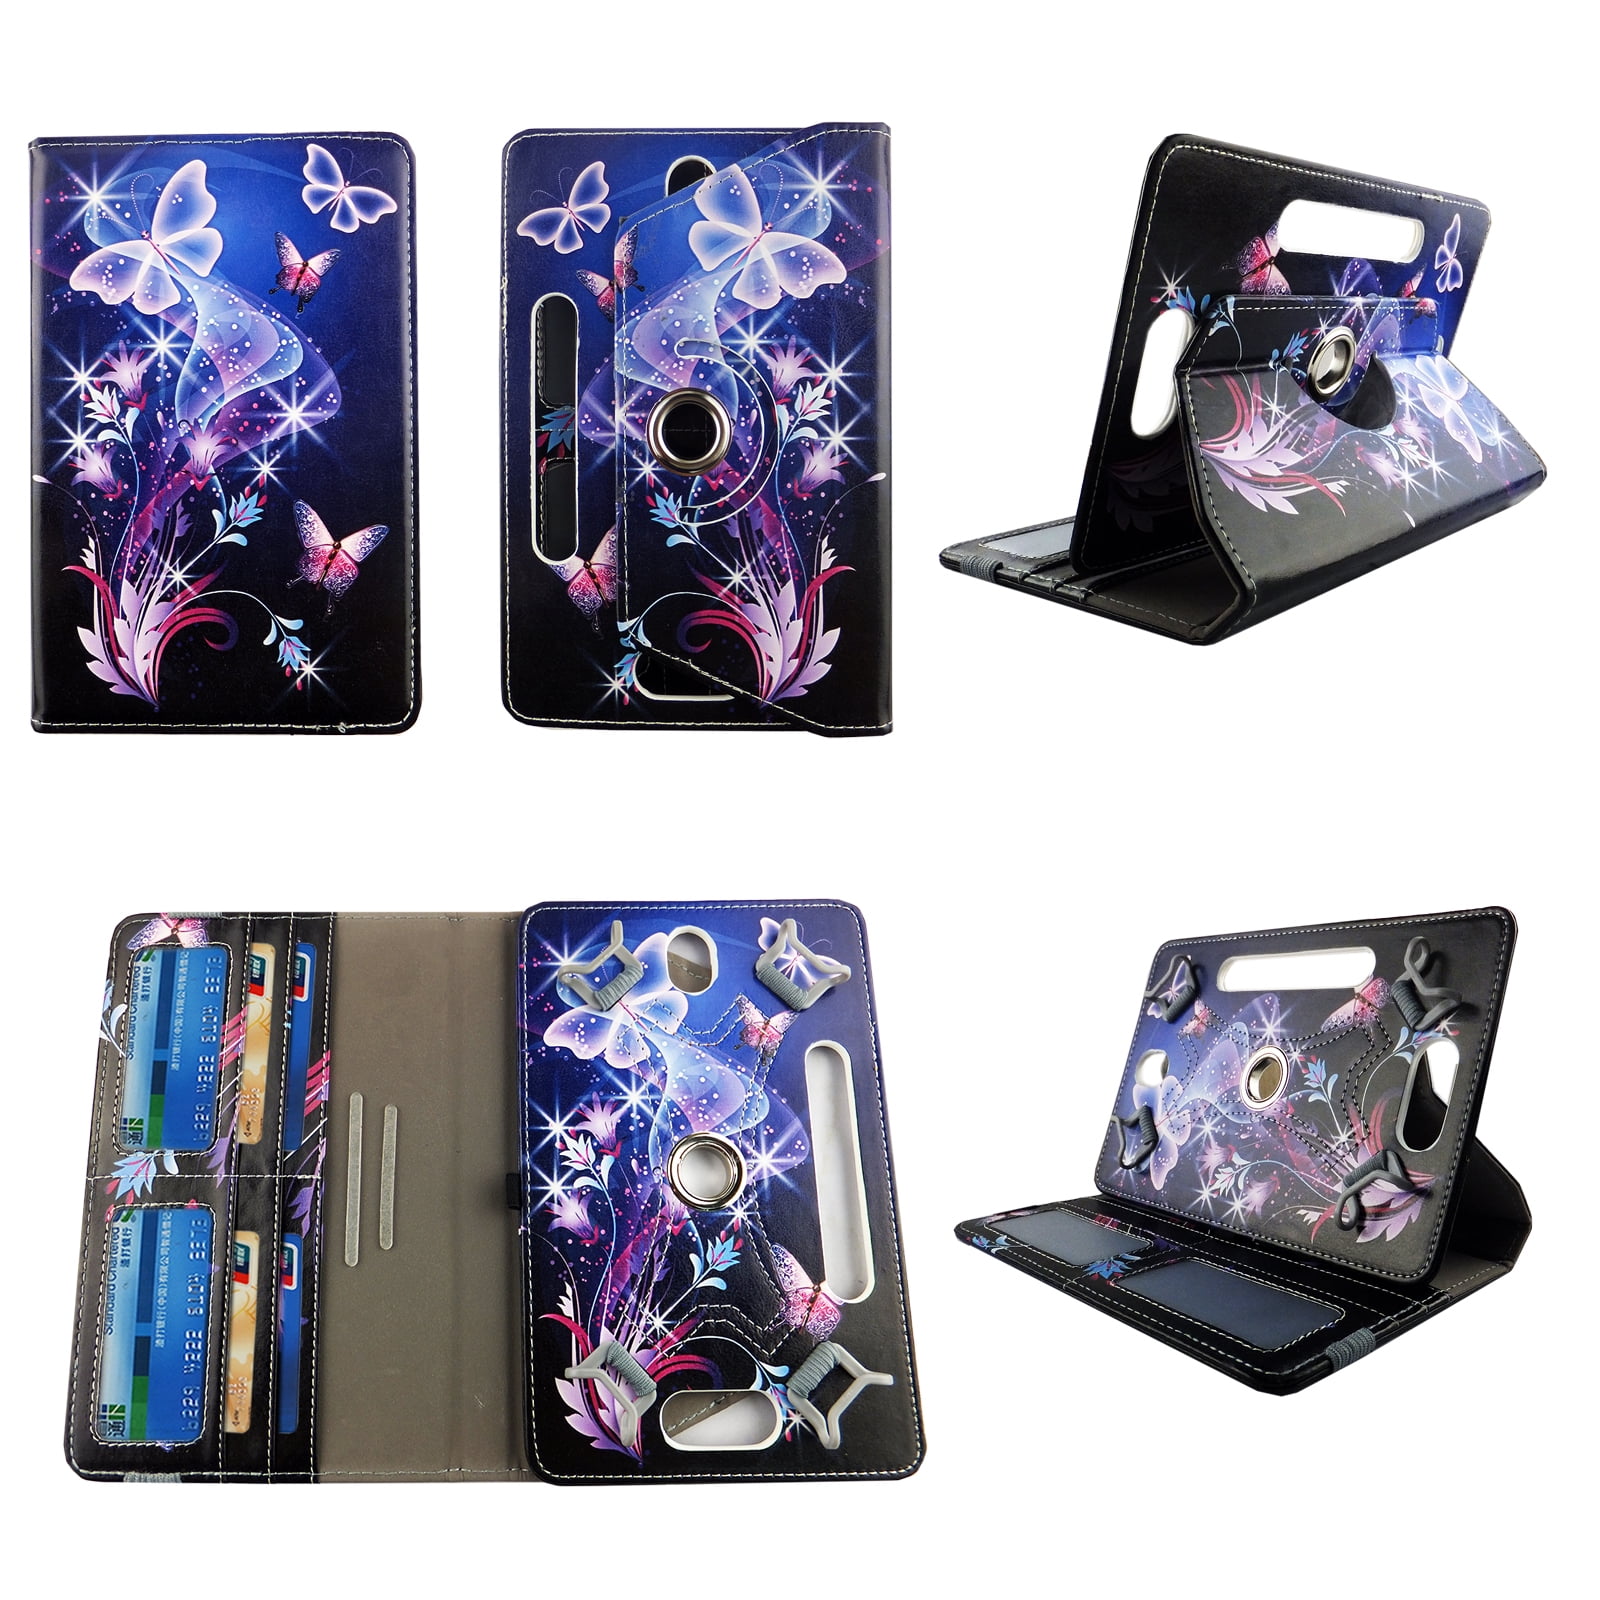 Binnen Uitroepteken Elektrisch Galaxy Style Butterfly tablet case 10 inch for Huawei Media Pad Link 10"  10inch android tablet cases 360 rotating slim folio stand protector pu  leather cover travel e-reader cash slots - Walmart.com